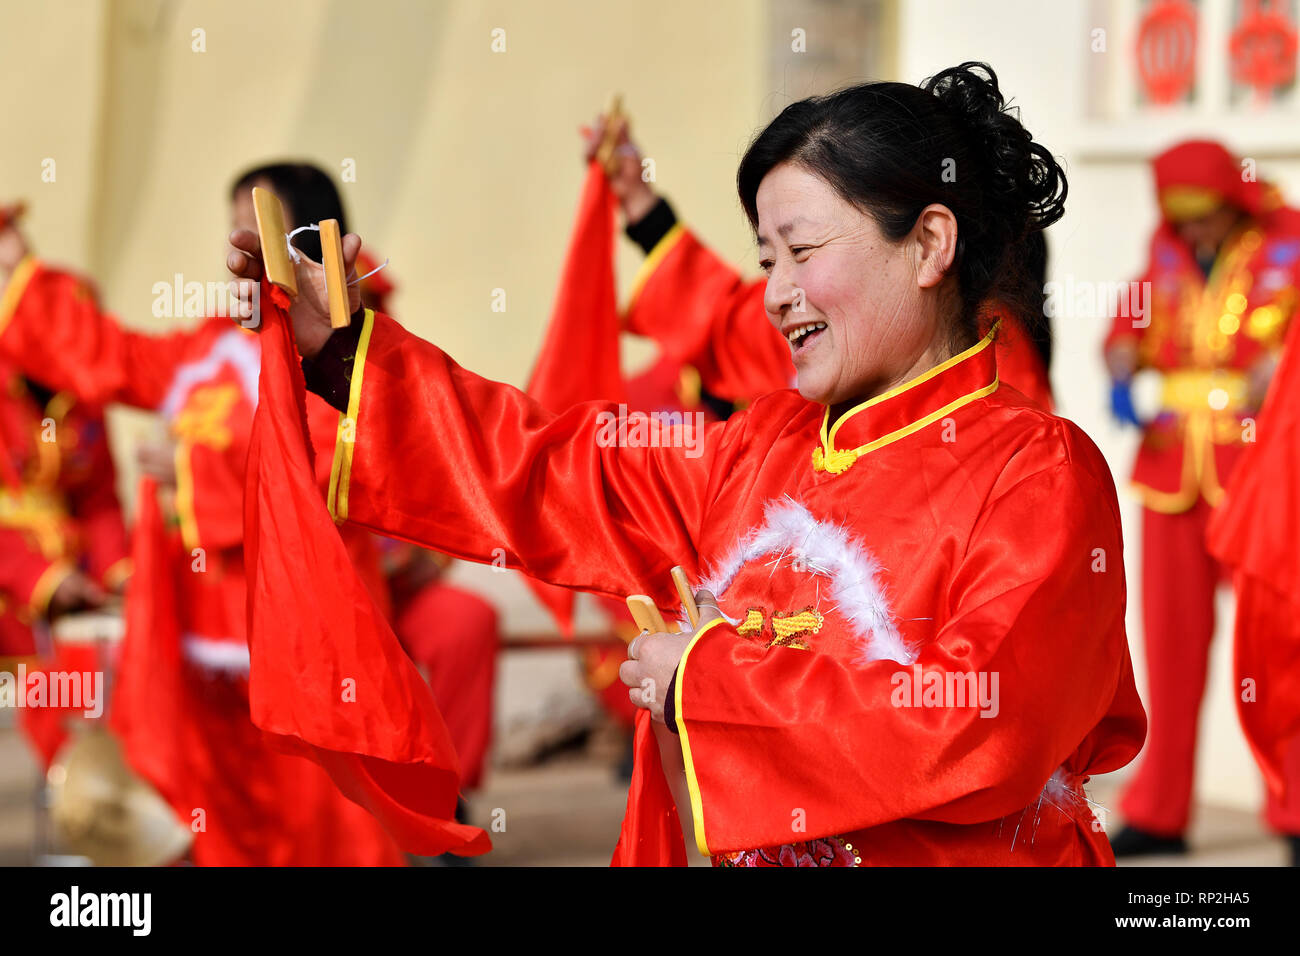 (190220) -- WUXIANG, Feb. 20, 2019 (Xinhua) -- Villagers perform folk art in Wangzhuanggou Village, Wuxiang County of north China's Shanxi Province, Feb. 19, 2019. For generations, residents of Wangzhuanggou Village barely scraped a living as a result of geographical isolation. However, a great change has been made since a series of poverty relief programs were launched in 2014. The whole village has been lifted out of poverty by the year of 2018 with the per capita annual income rising to 6,100 yuan (907 U.S. dollars) that enables villagers to spend on an grand celebration of the Spring Festi Stock Photo